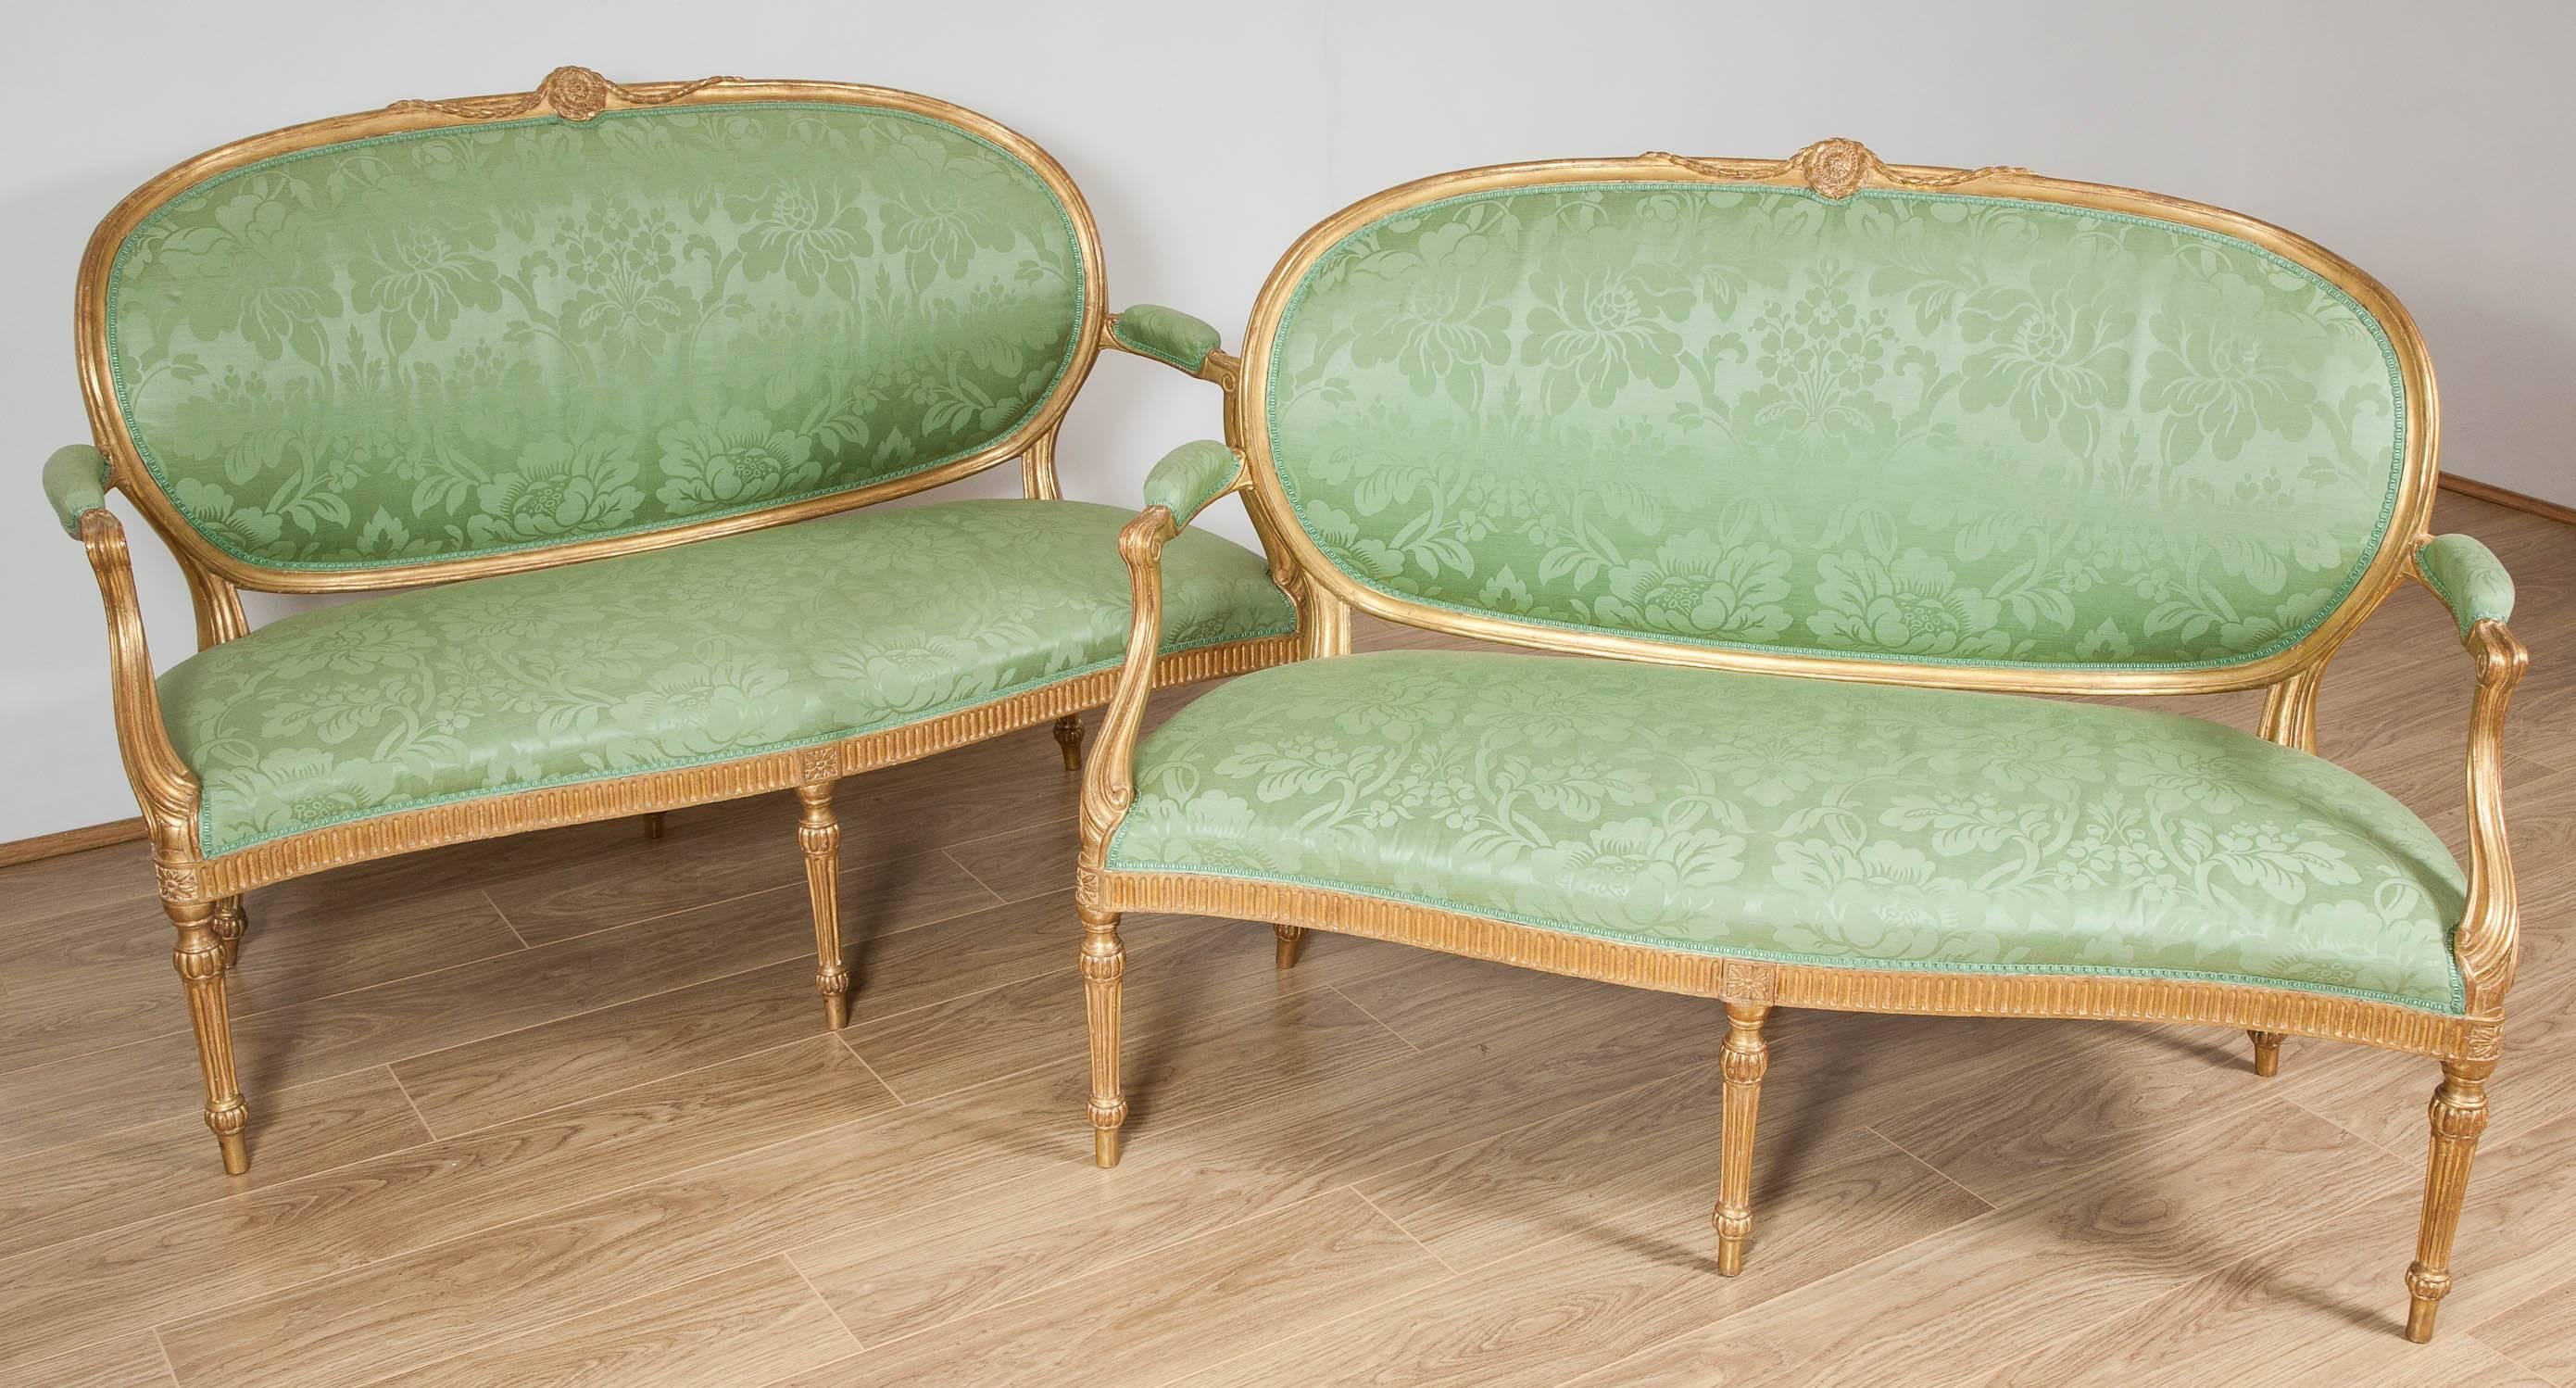 George III Pair of Carved Giltwood Settees, 18th Century Attributable to Thomas Chippendale For Sale